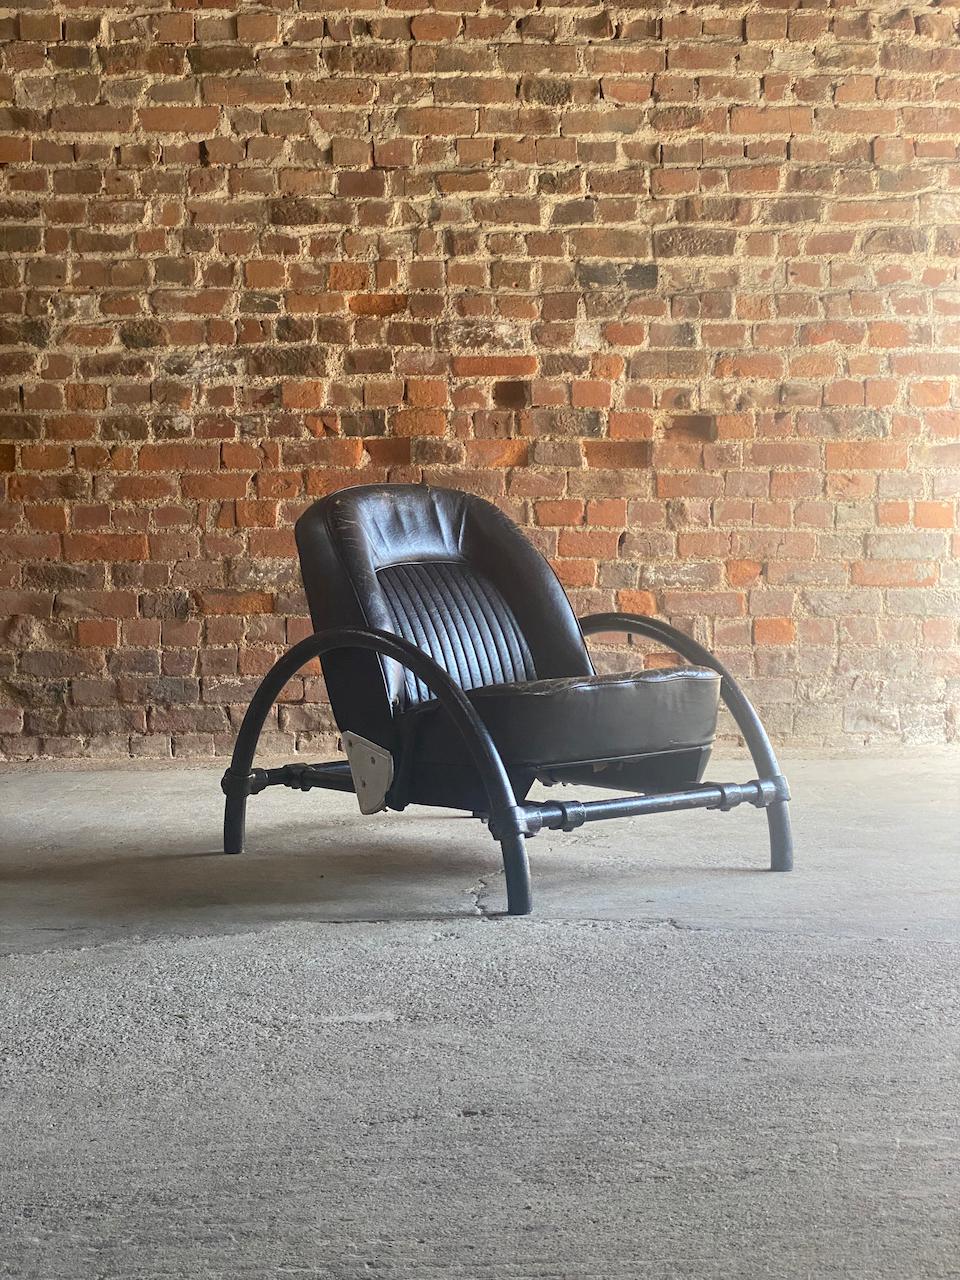 Ron Arad rover chair by One Off Limited Circa 1981

Ron Arad 'Rover' armchair by One Off Ltd London circa 1981 finished in black leather upholstery, designed by Arad in 1981 during his early experimentation with industrial design, after salvaging